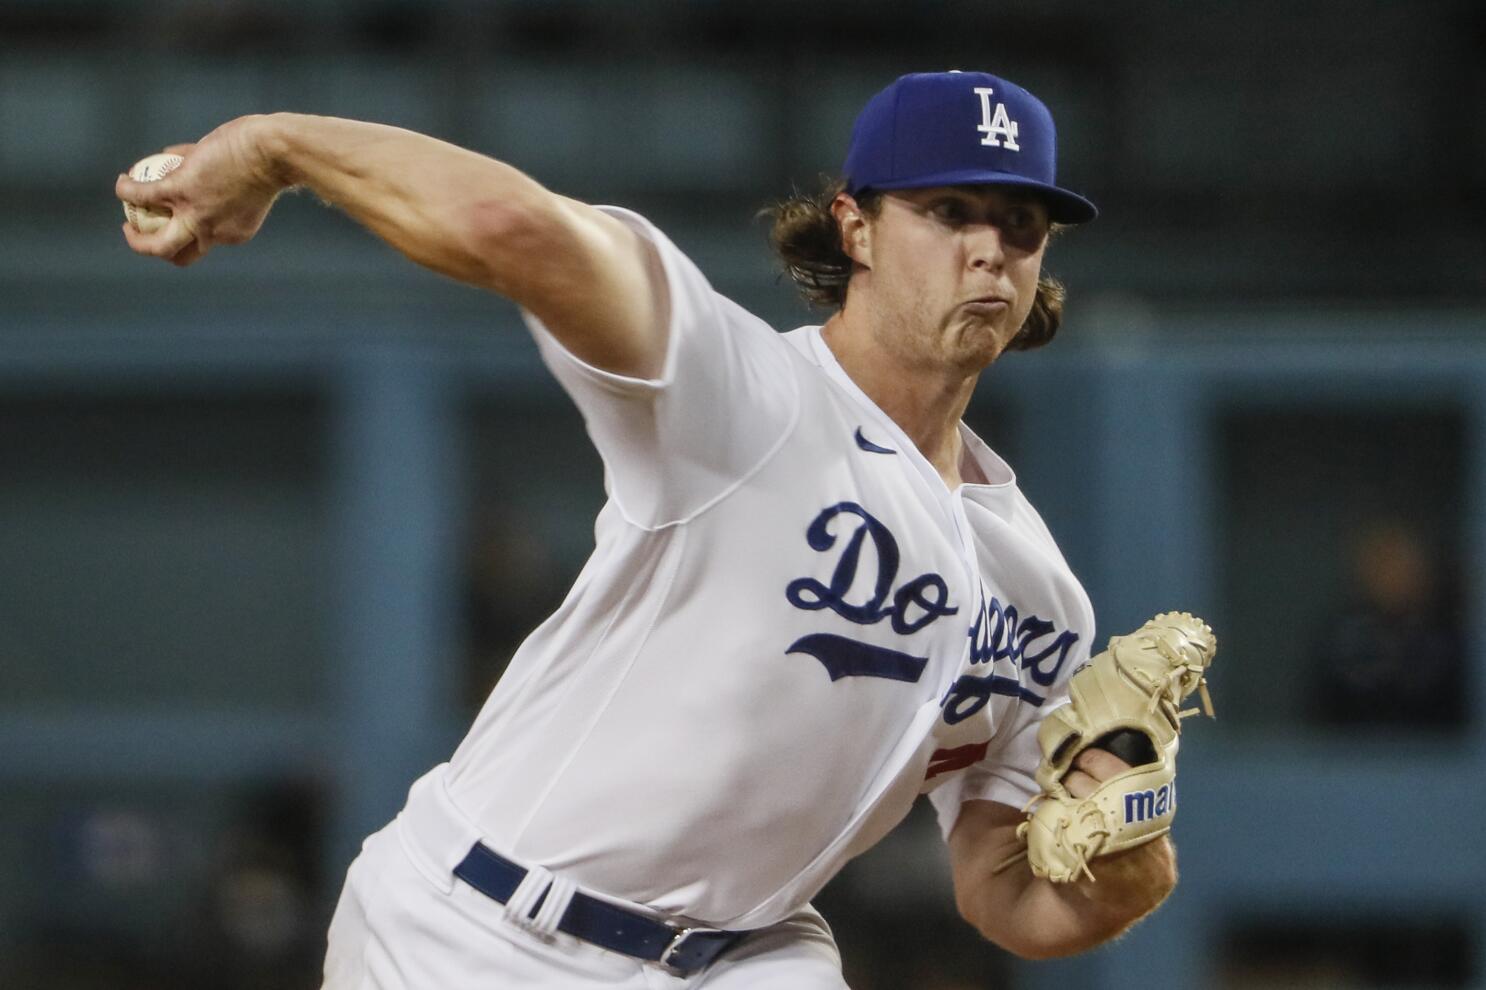 Ryan Pepiot, Butler and Westfield grad, makes MLB debut with Dodgers